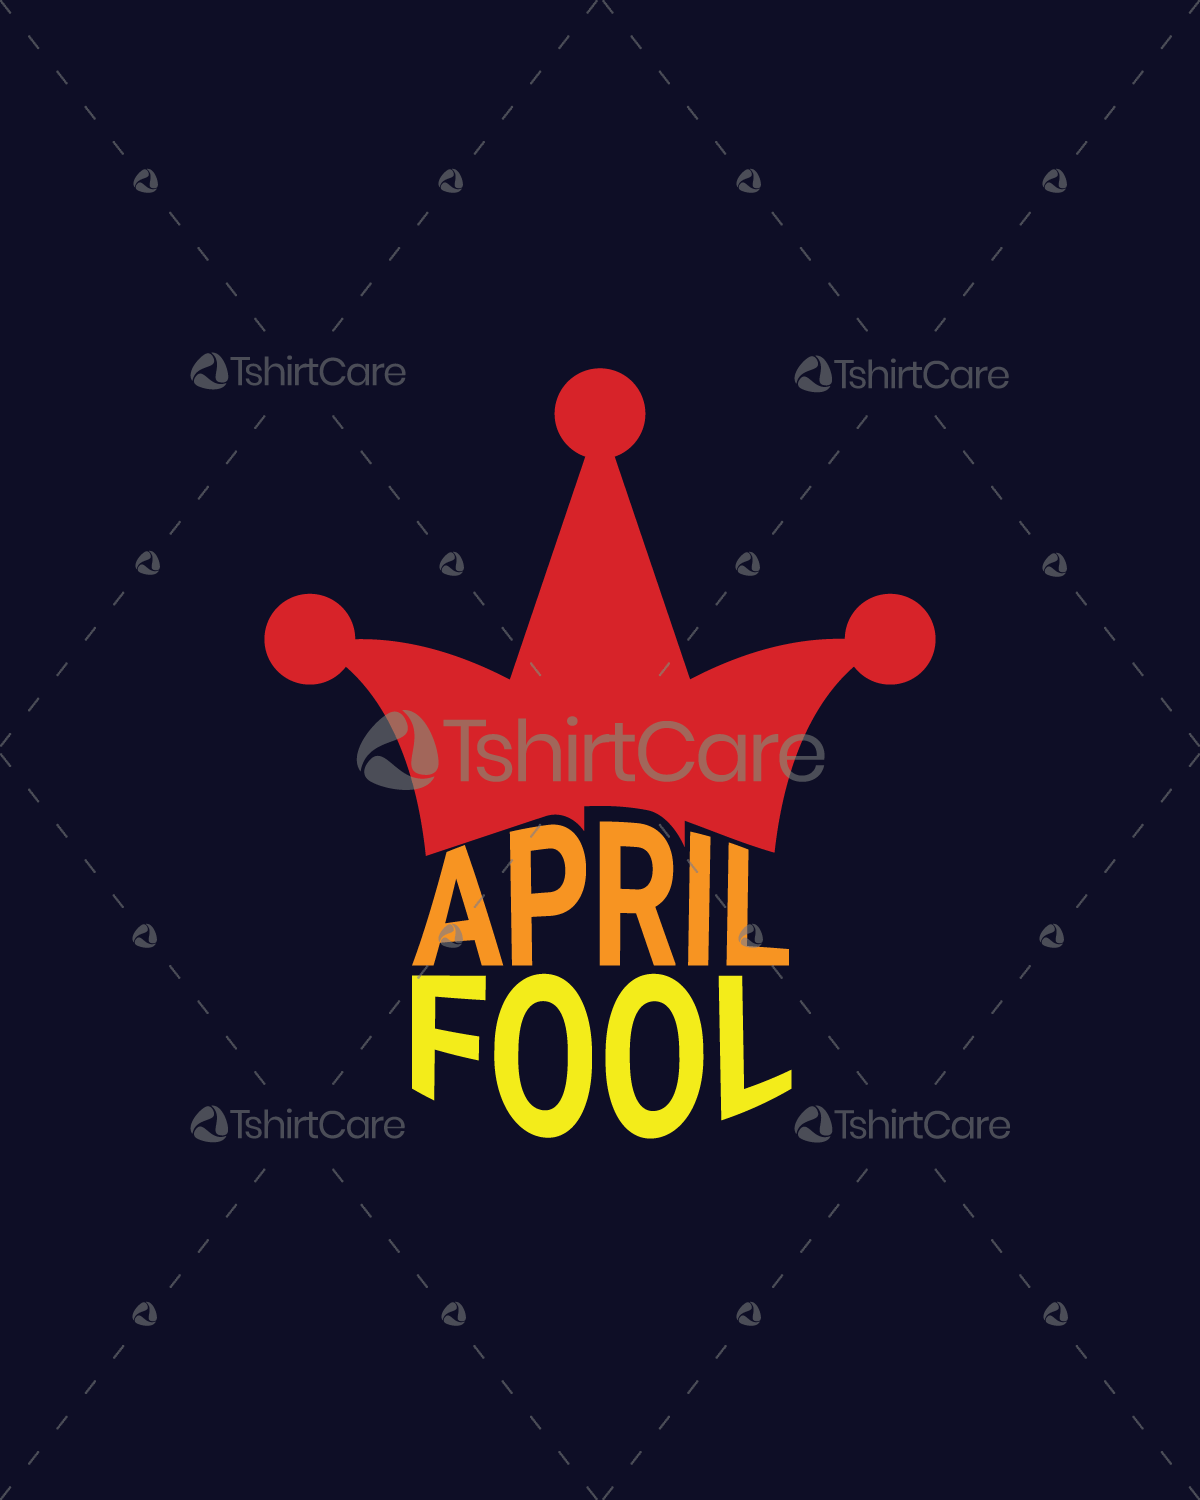 April Fools' Day Pranks - Thoughtful Gifts | Sunburst GiftsThoughtful Gifts  | Sunburst Gifts